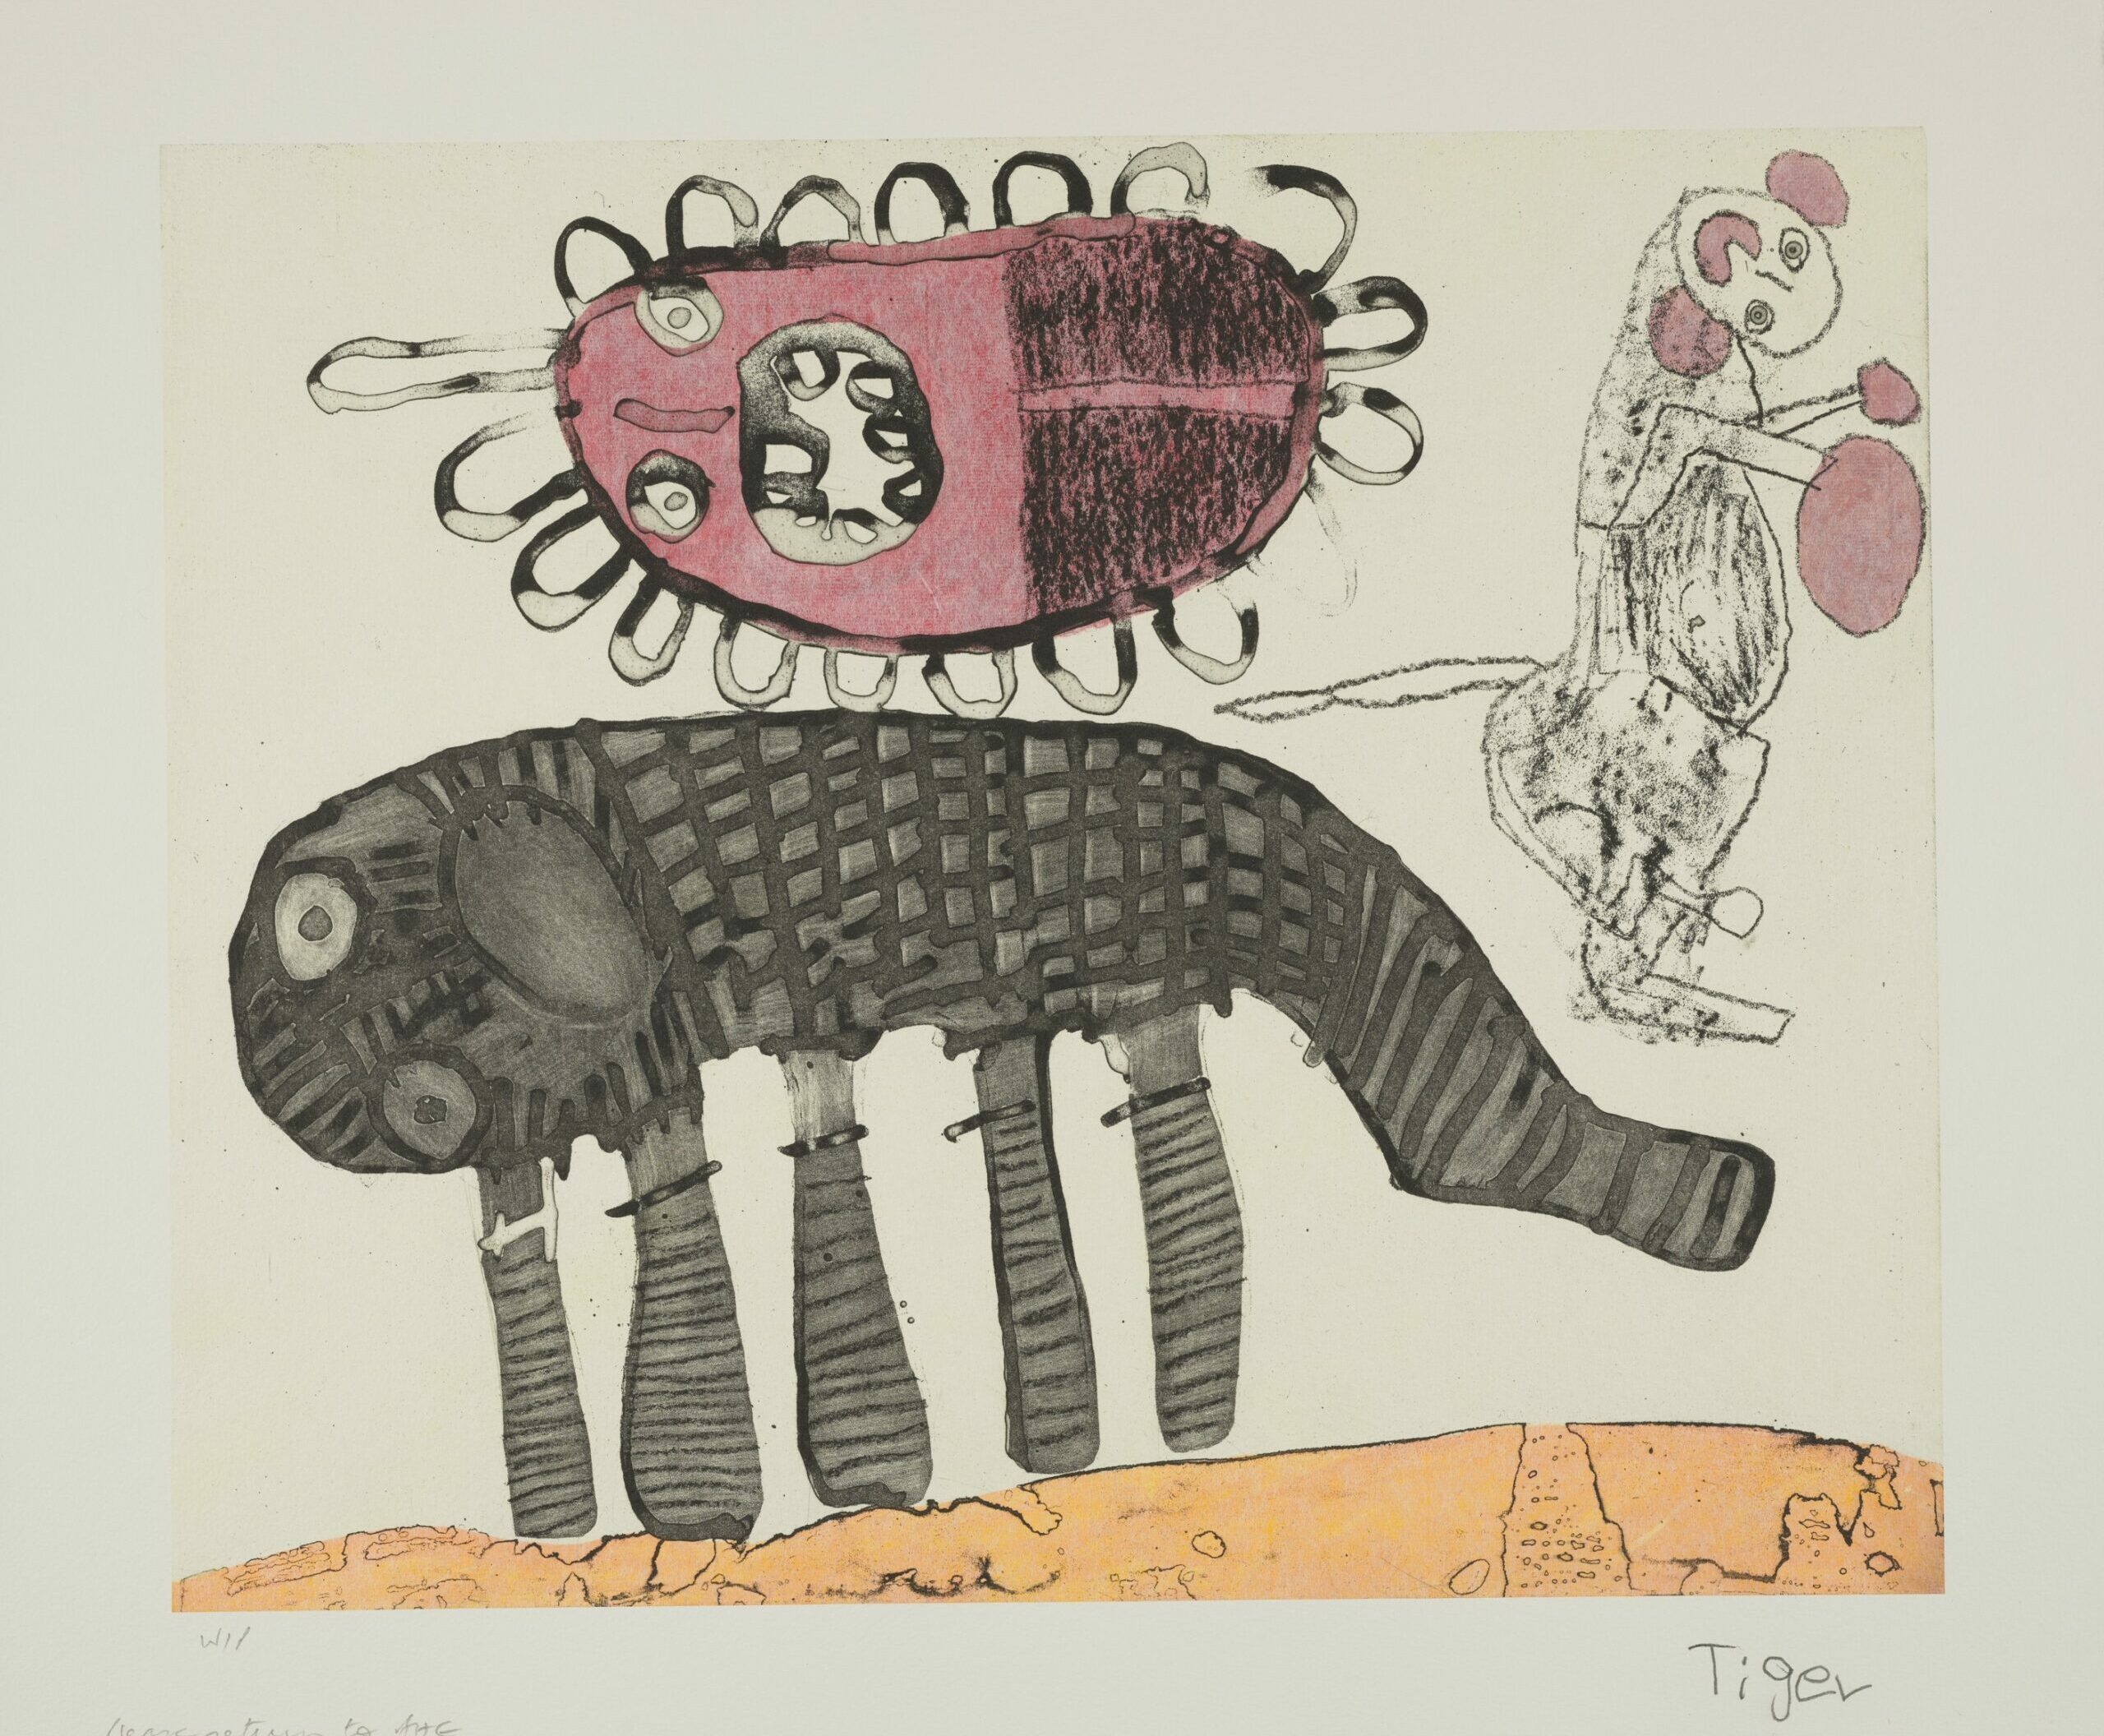 TIGER YALTANGKI, Malpa Wiru (Good Friends), 2015, etching with chine collé on Hahnemühle paper, printer: Basil Hall. Kluge-Ruhe Aboriginal Art Collection of the University of Virginia, gift of Basil Hall, 2023.0006.029.009. Courtesy of the artist, Iwantja Arts, and Alcaston Gallery